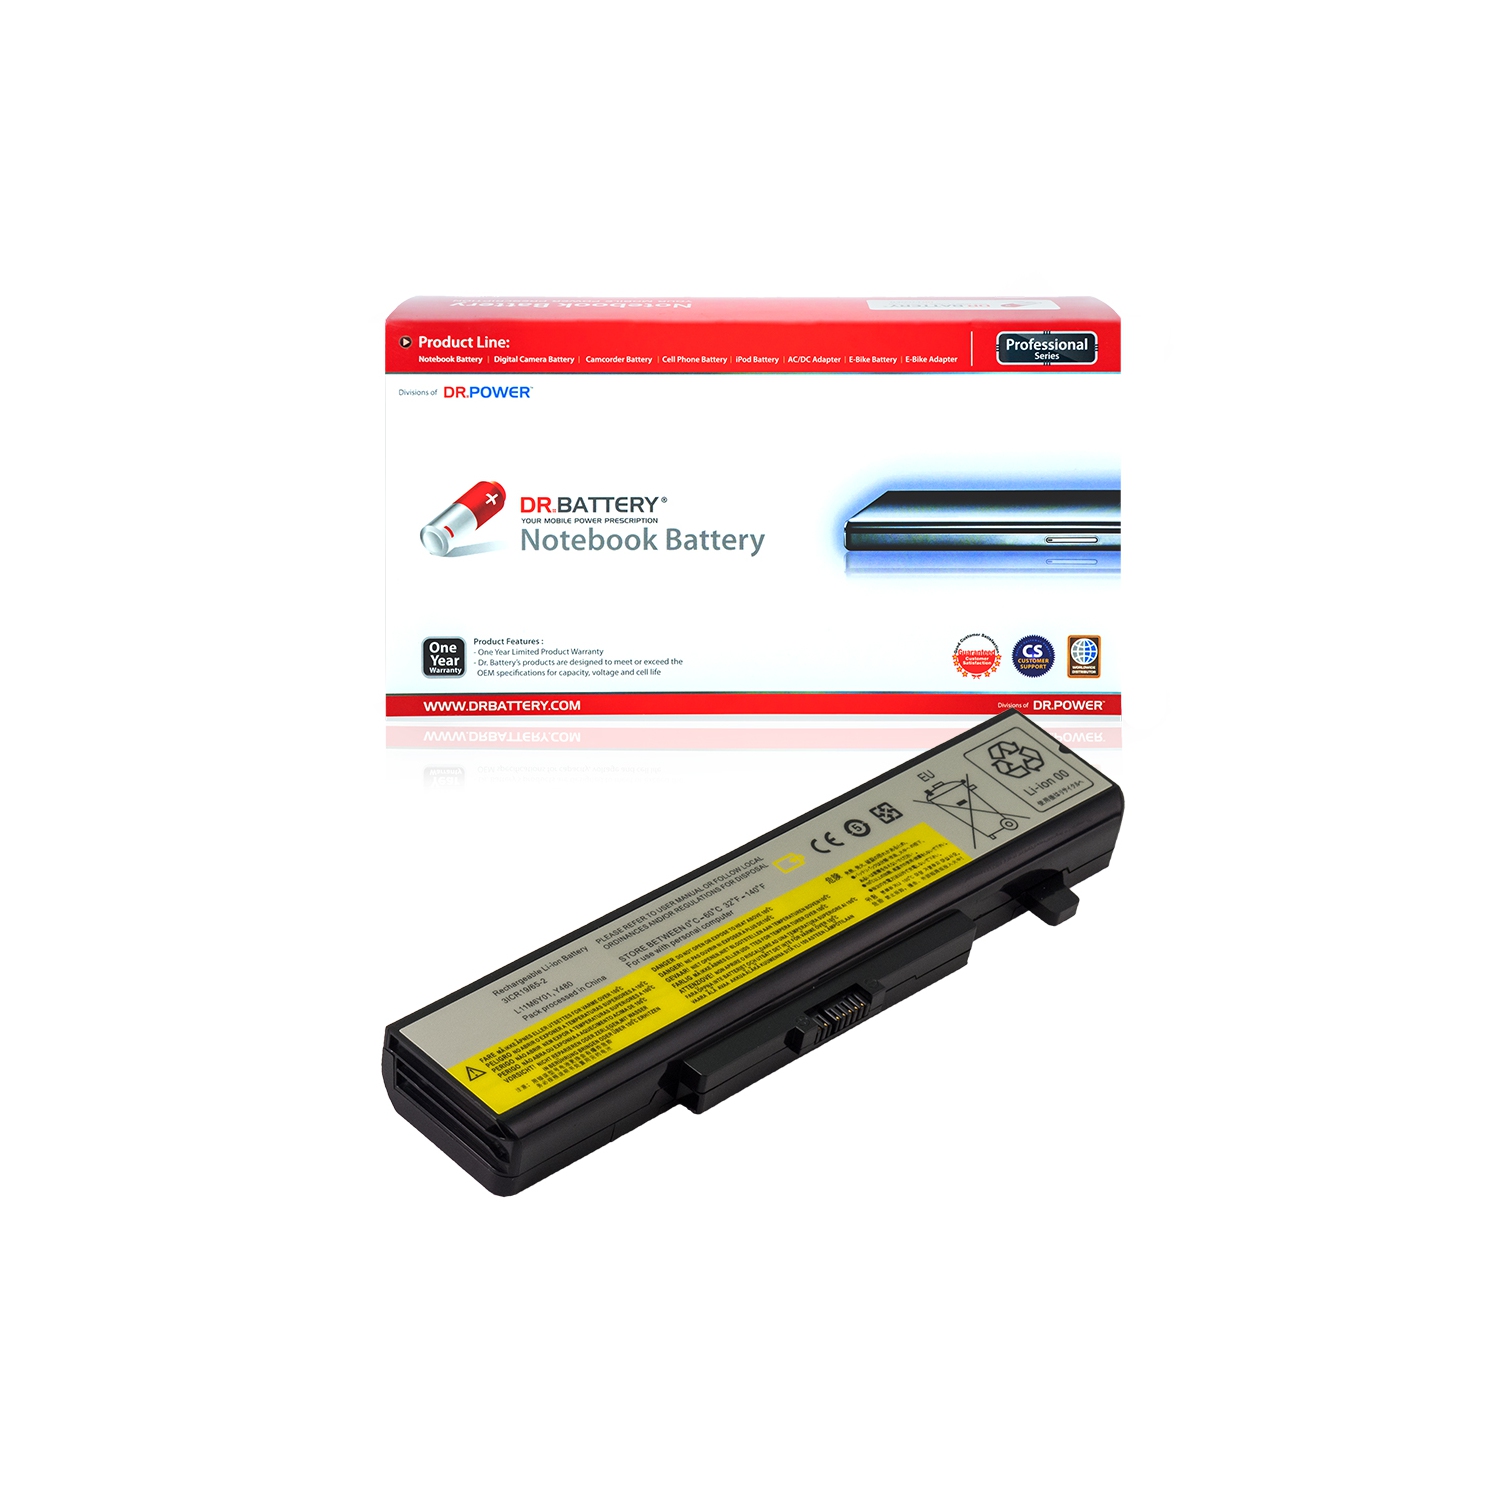 DR. BATTERY - Replacement for Lenovo Essential B580 / B590 / G480 / G485 / G580 / 45N1042 / 45N1043 / 45N1045 / 45N1047